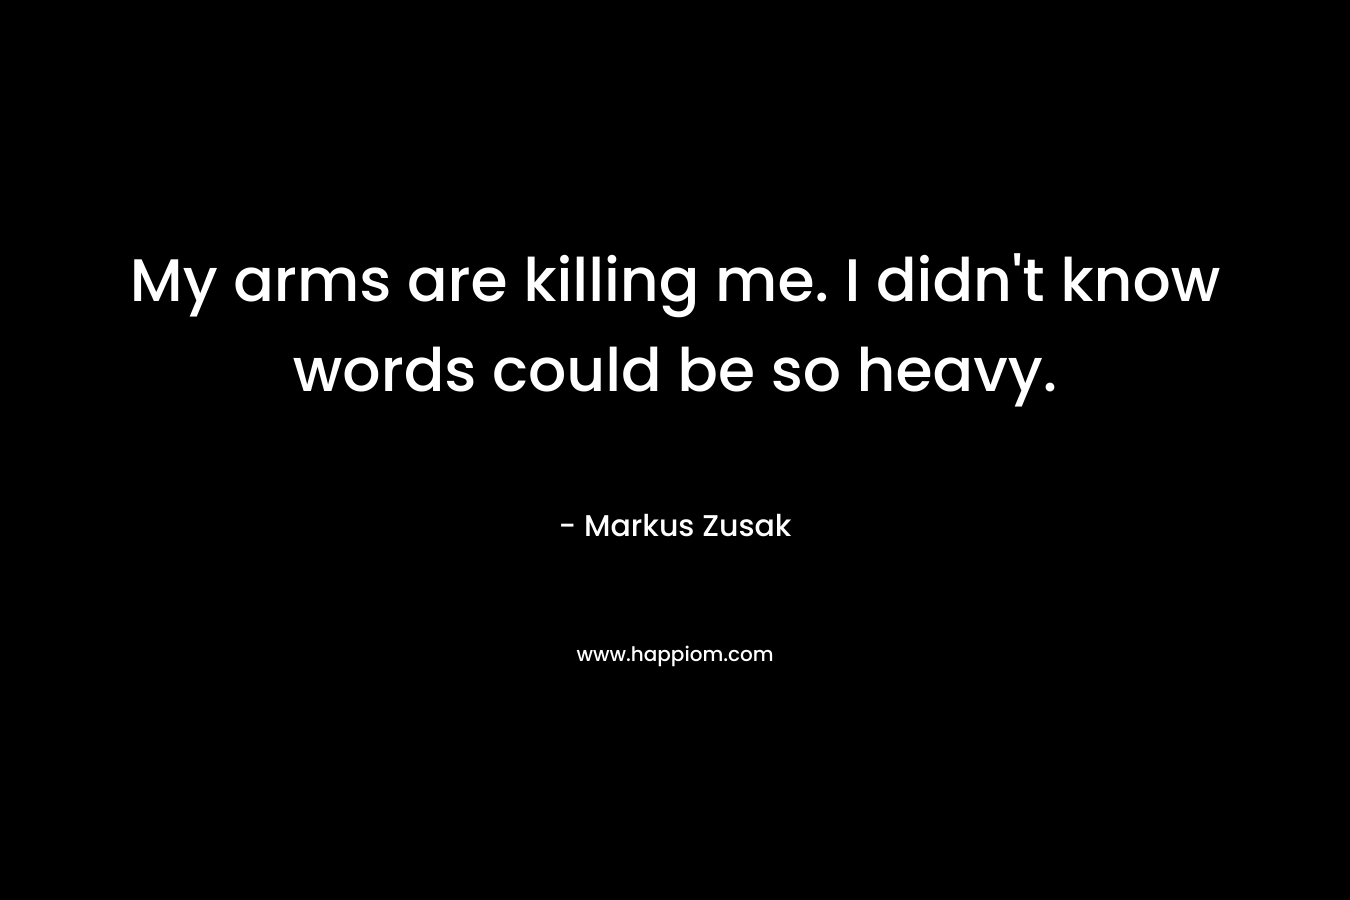 My arms are killing me. I didn't know words could be so heavy.